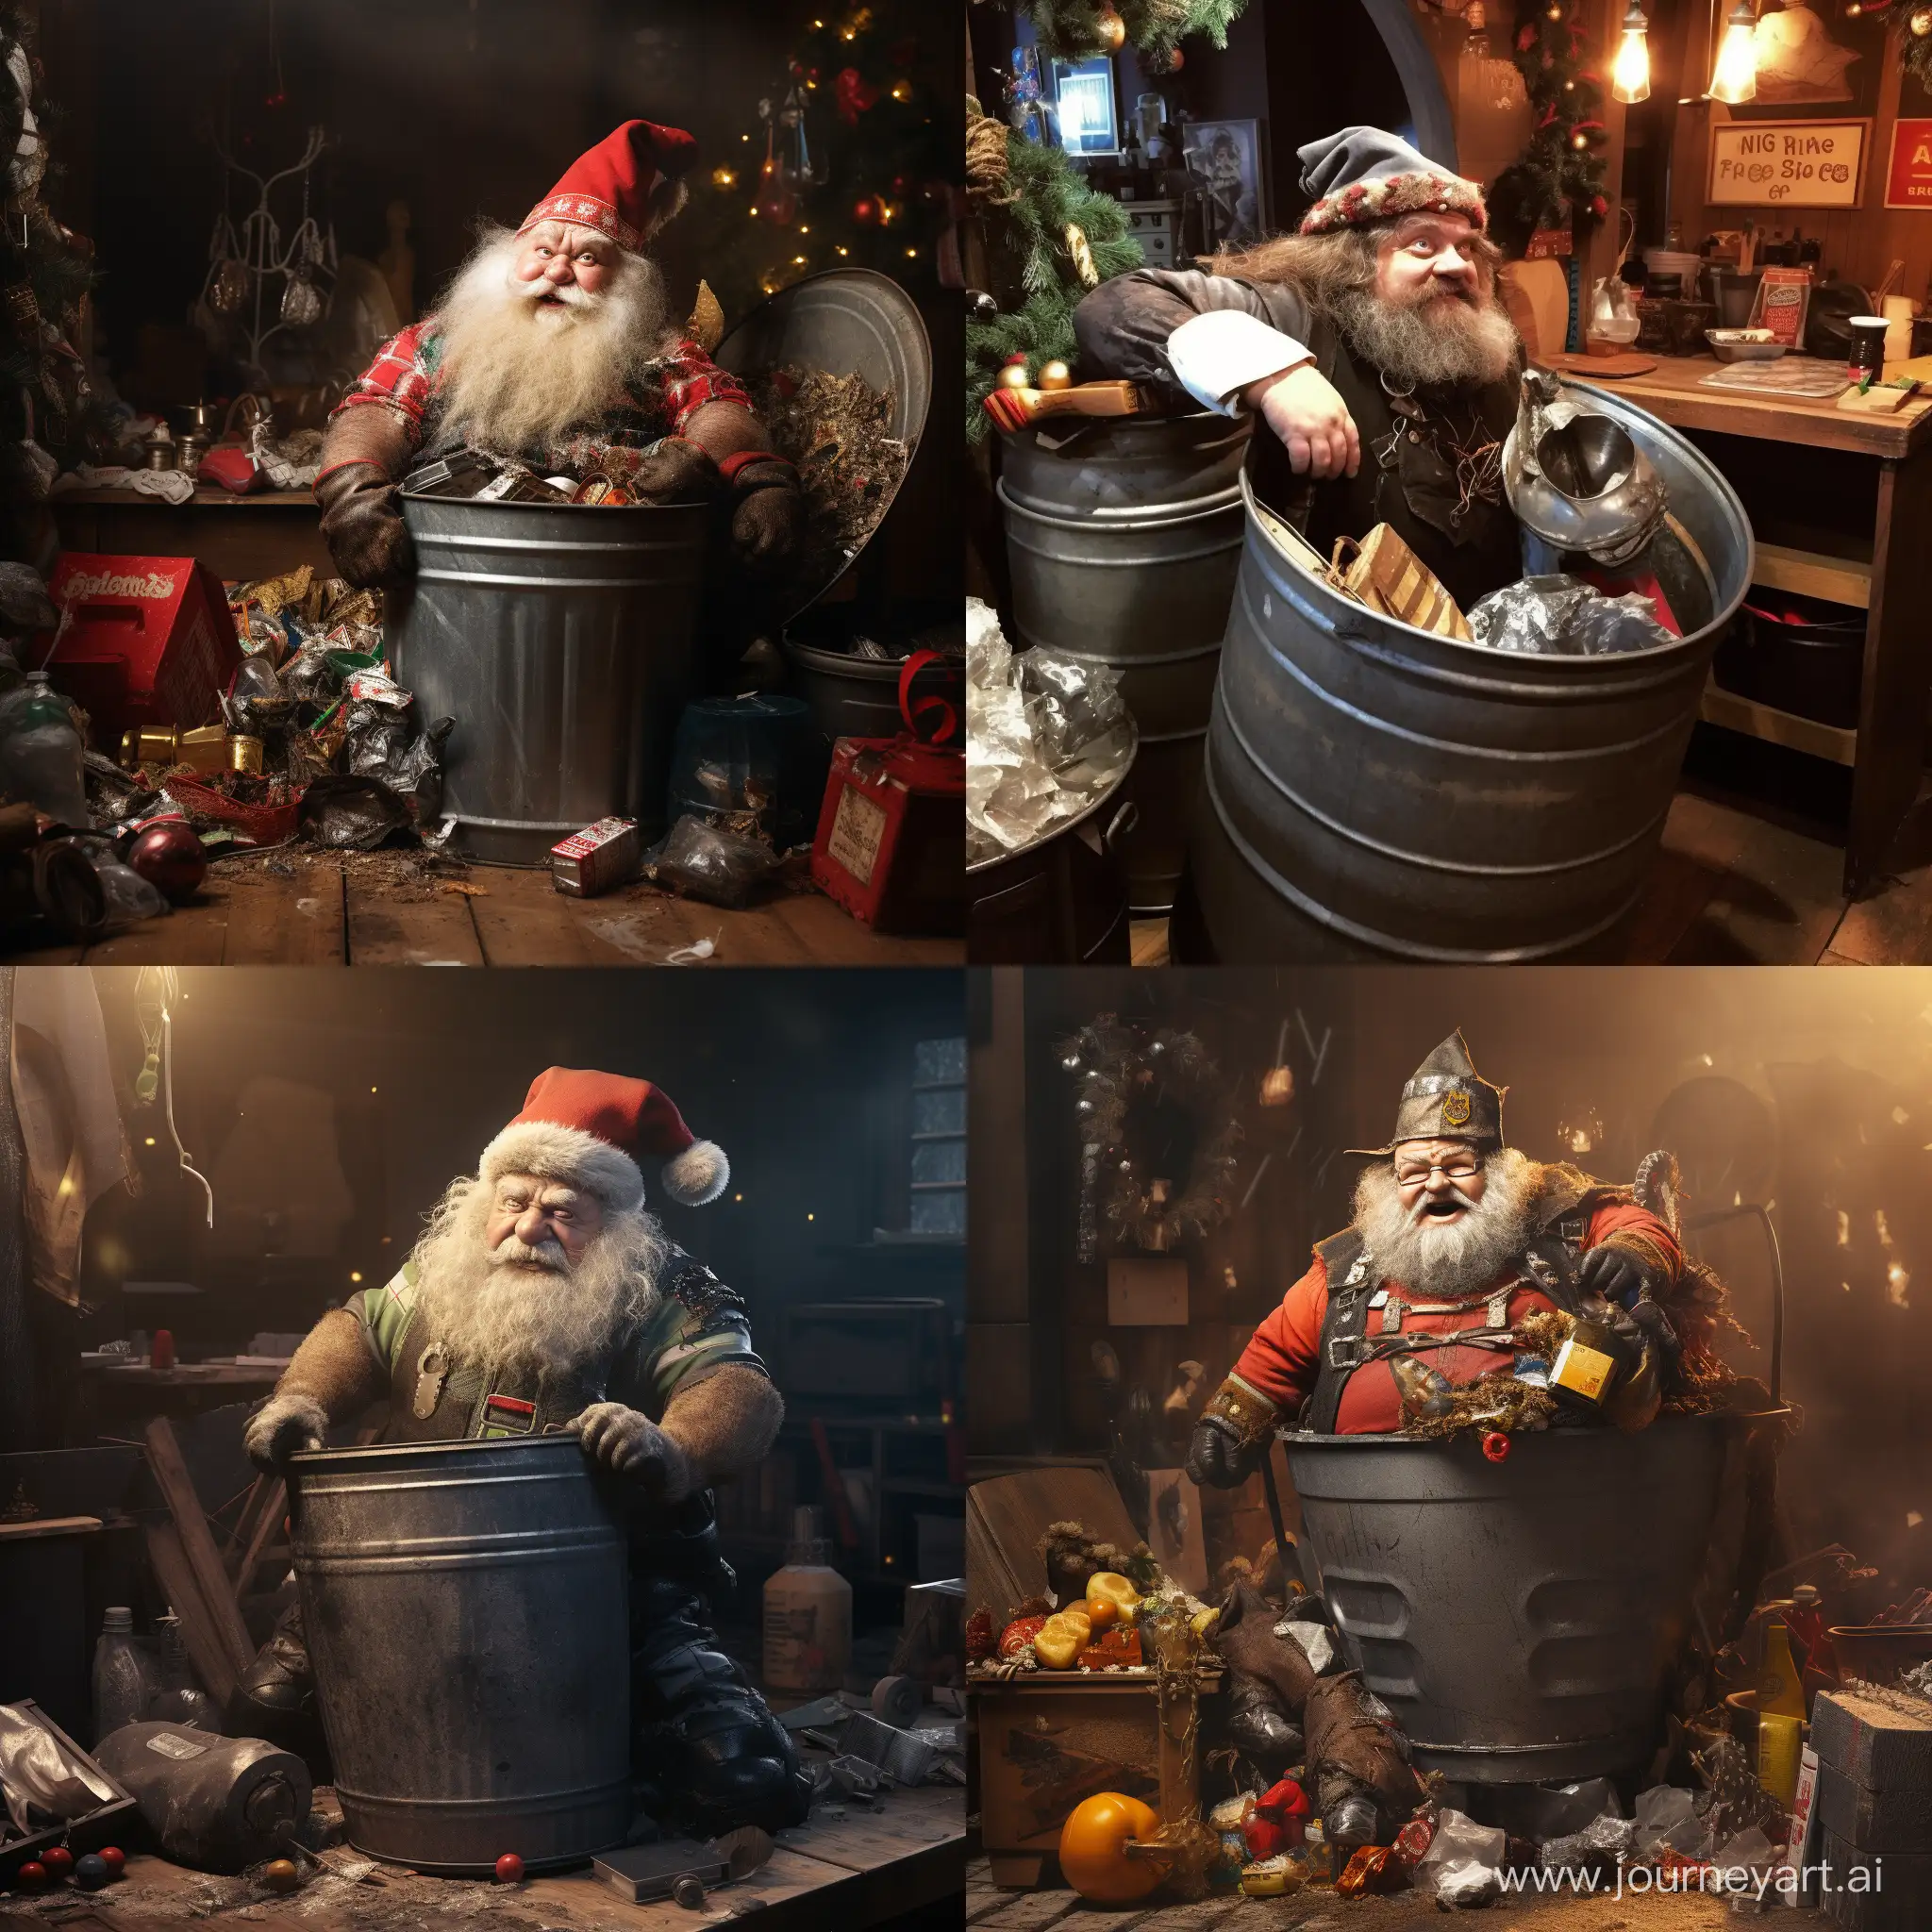 the Christmas dwarf recycling waste to the waste bins